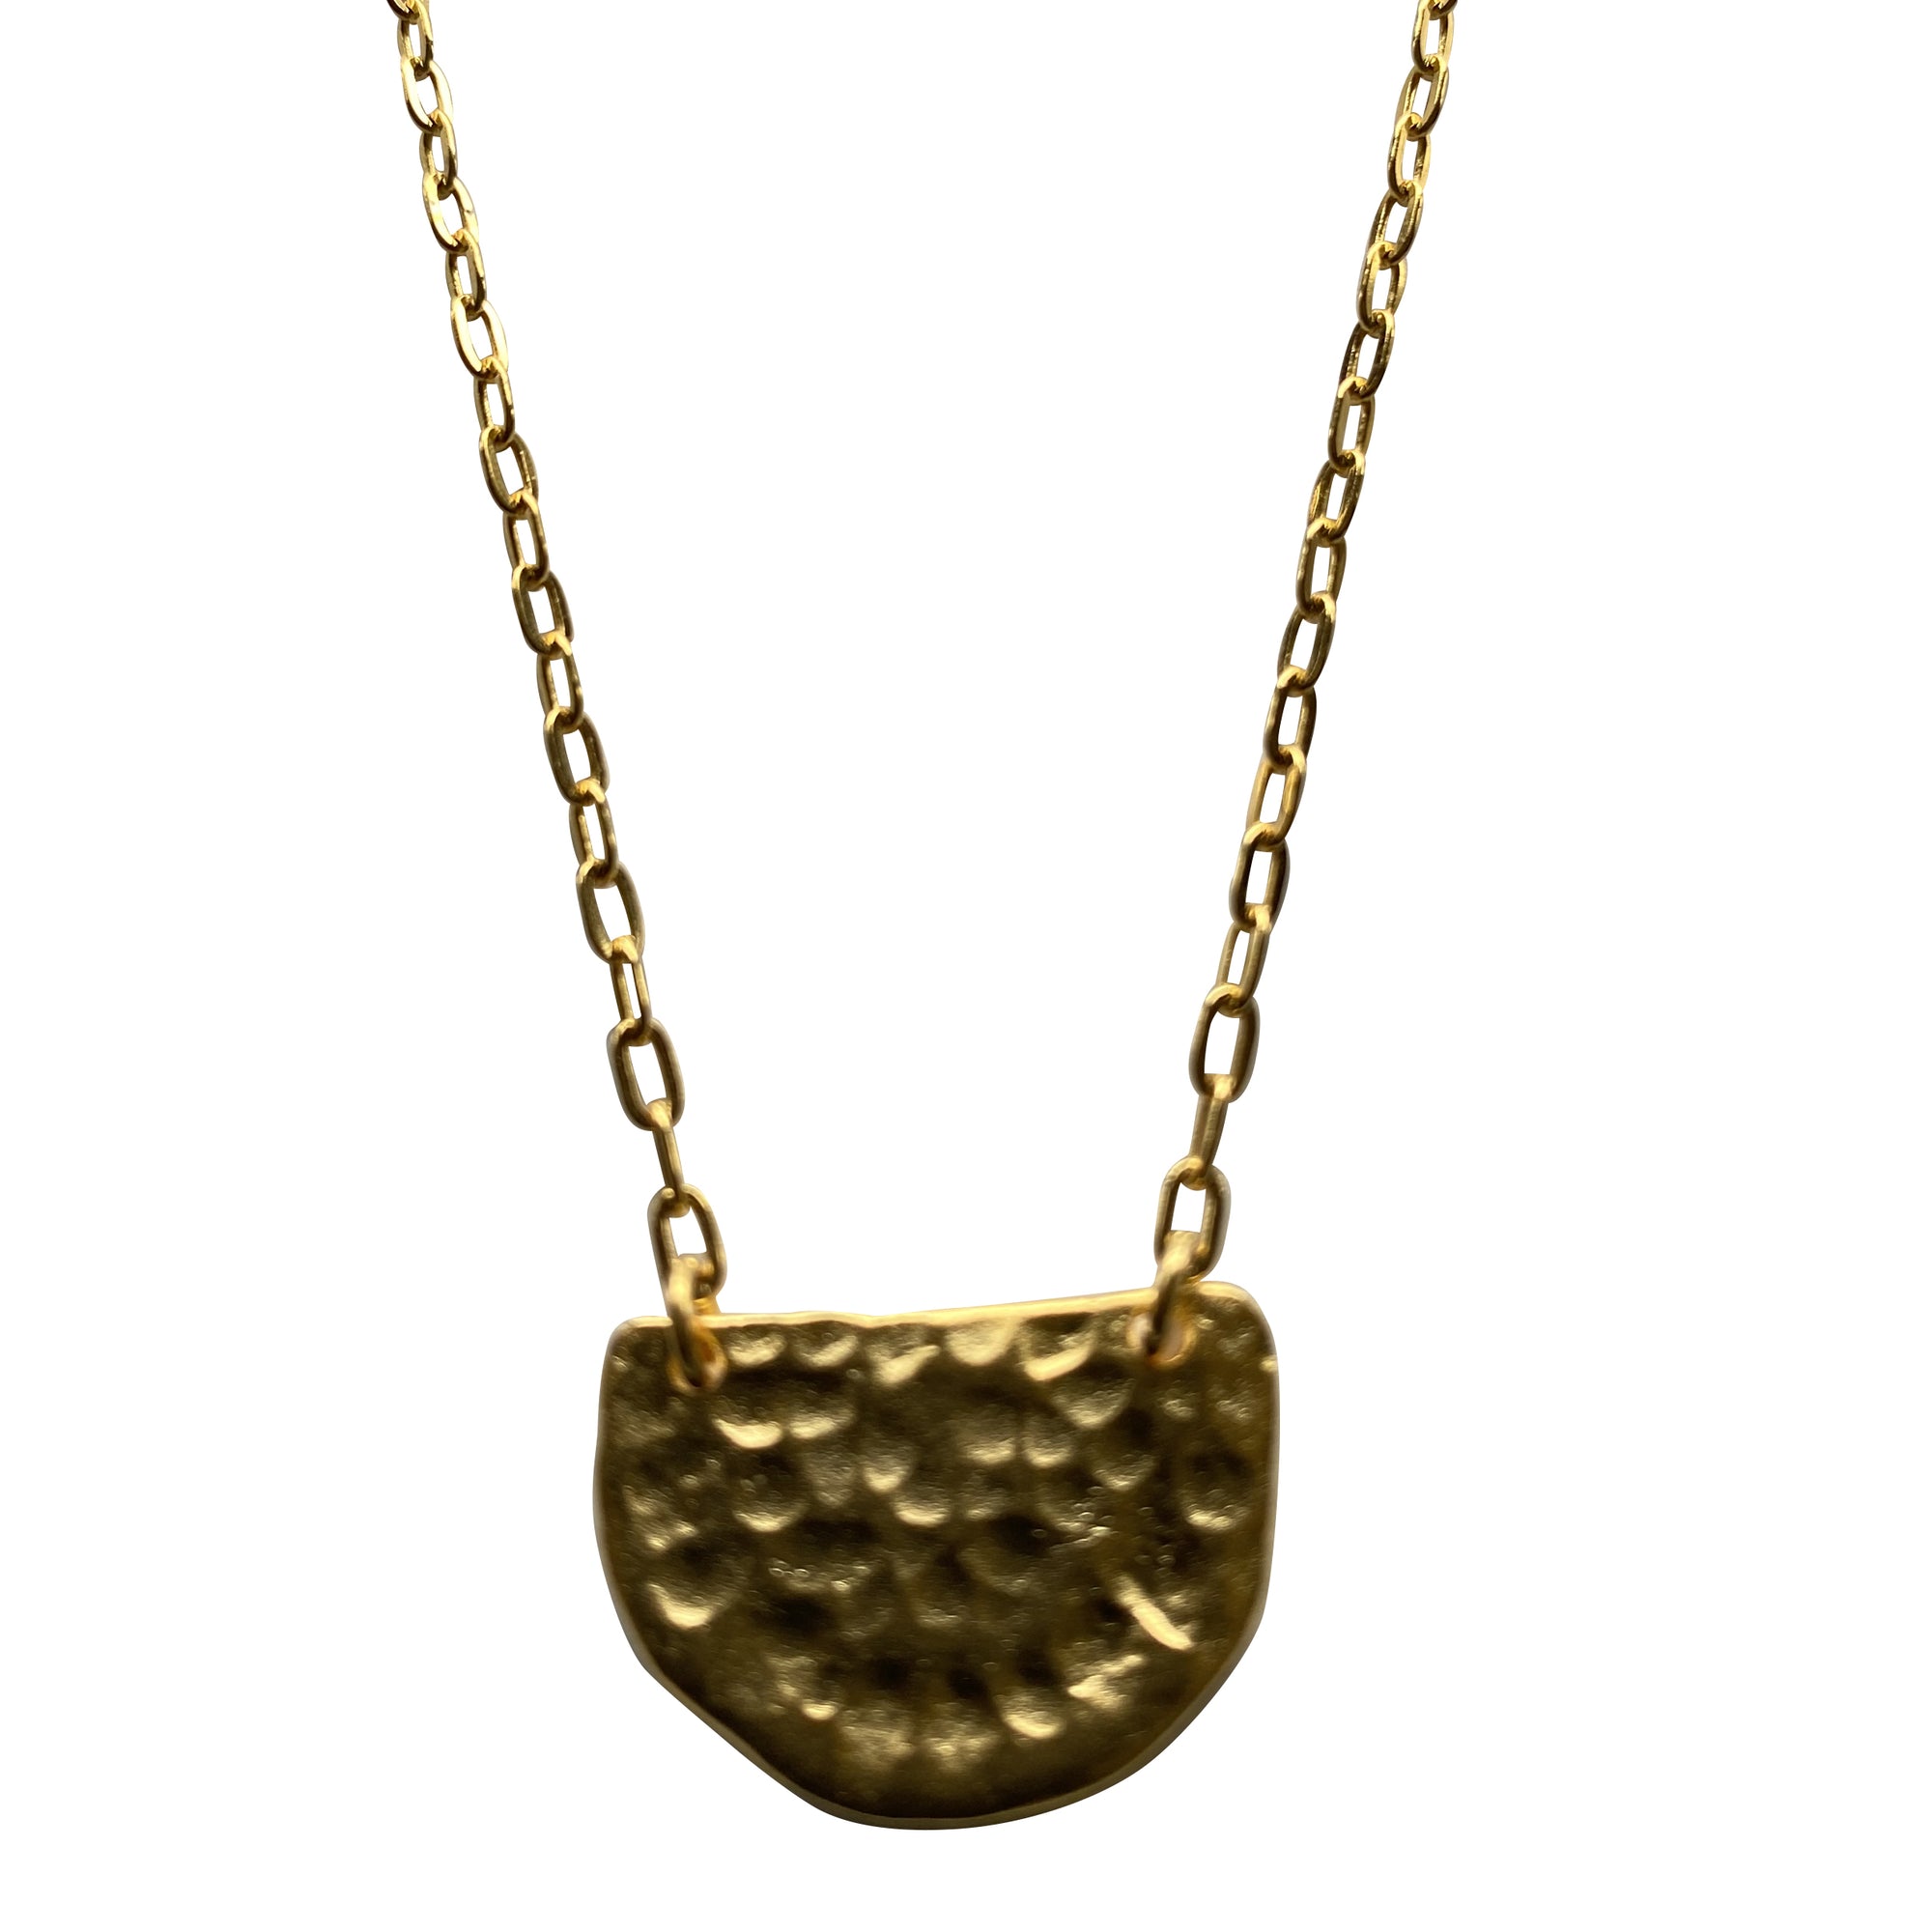 Gold Chain Necklace with Hammered Half Circle Pendant